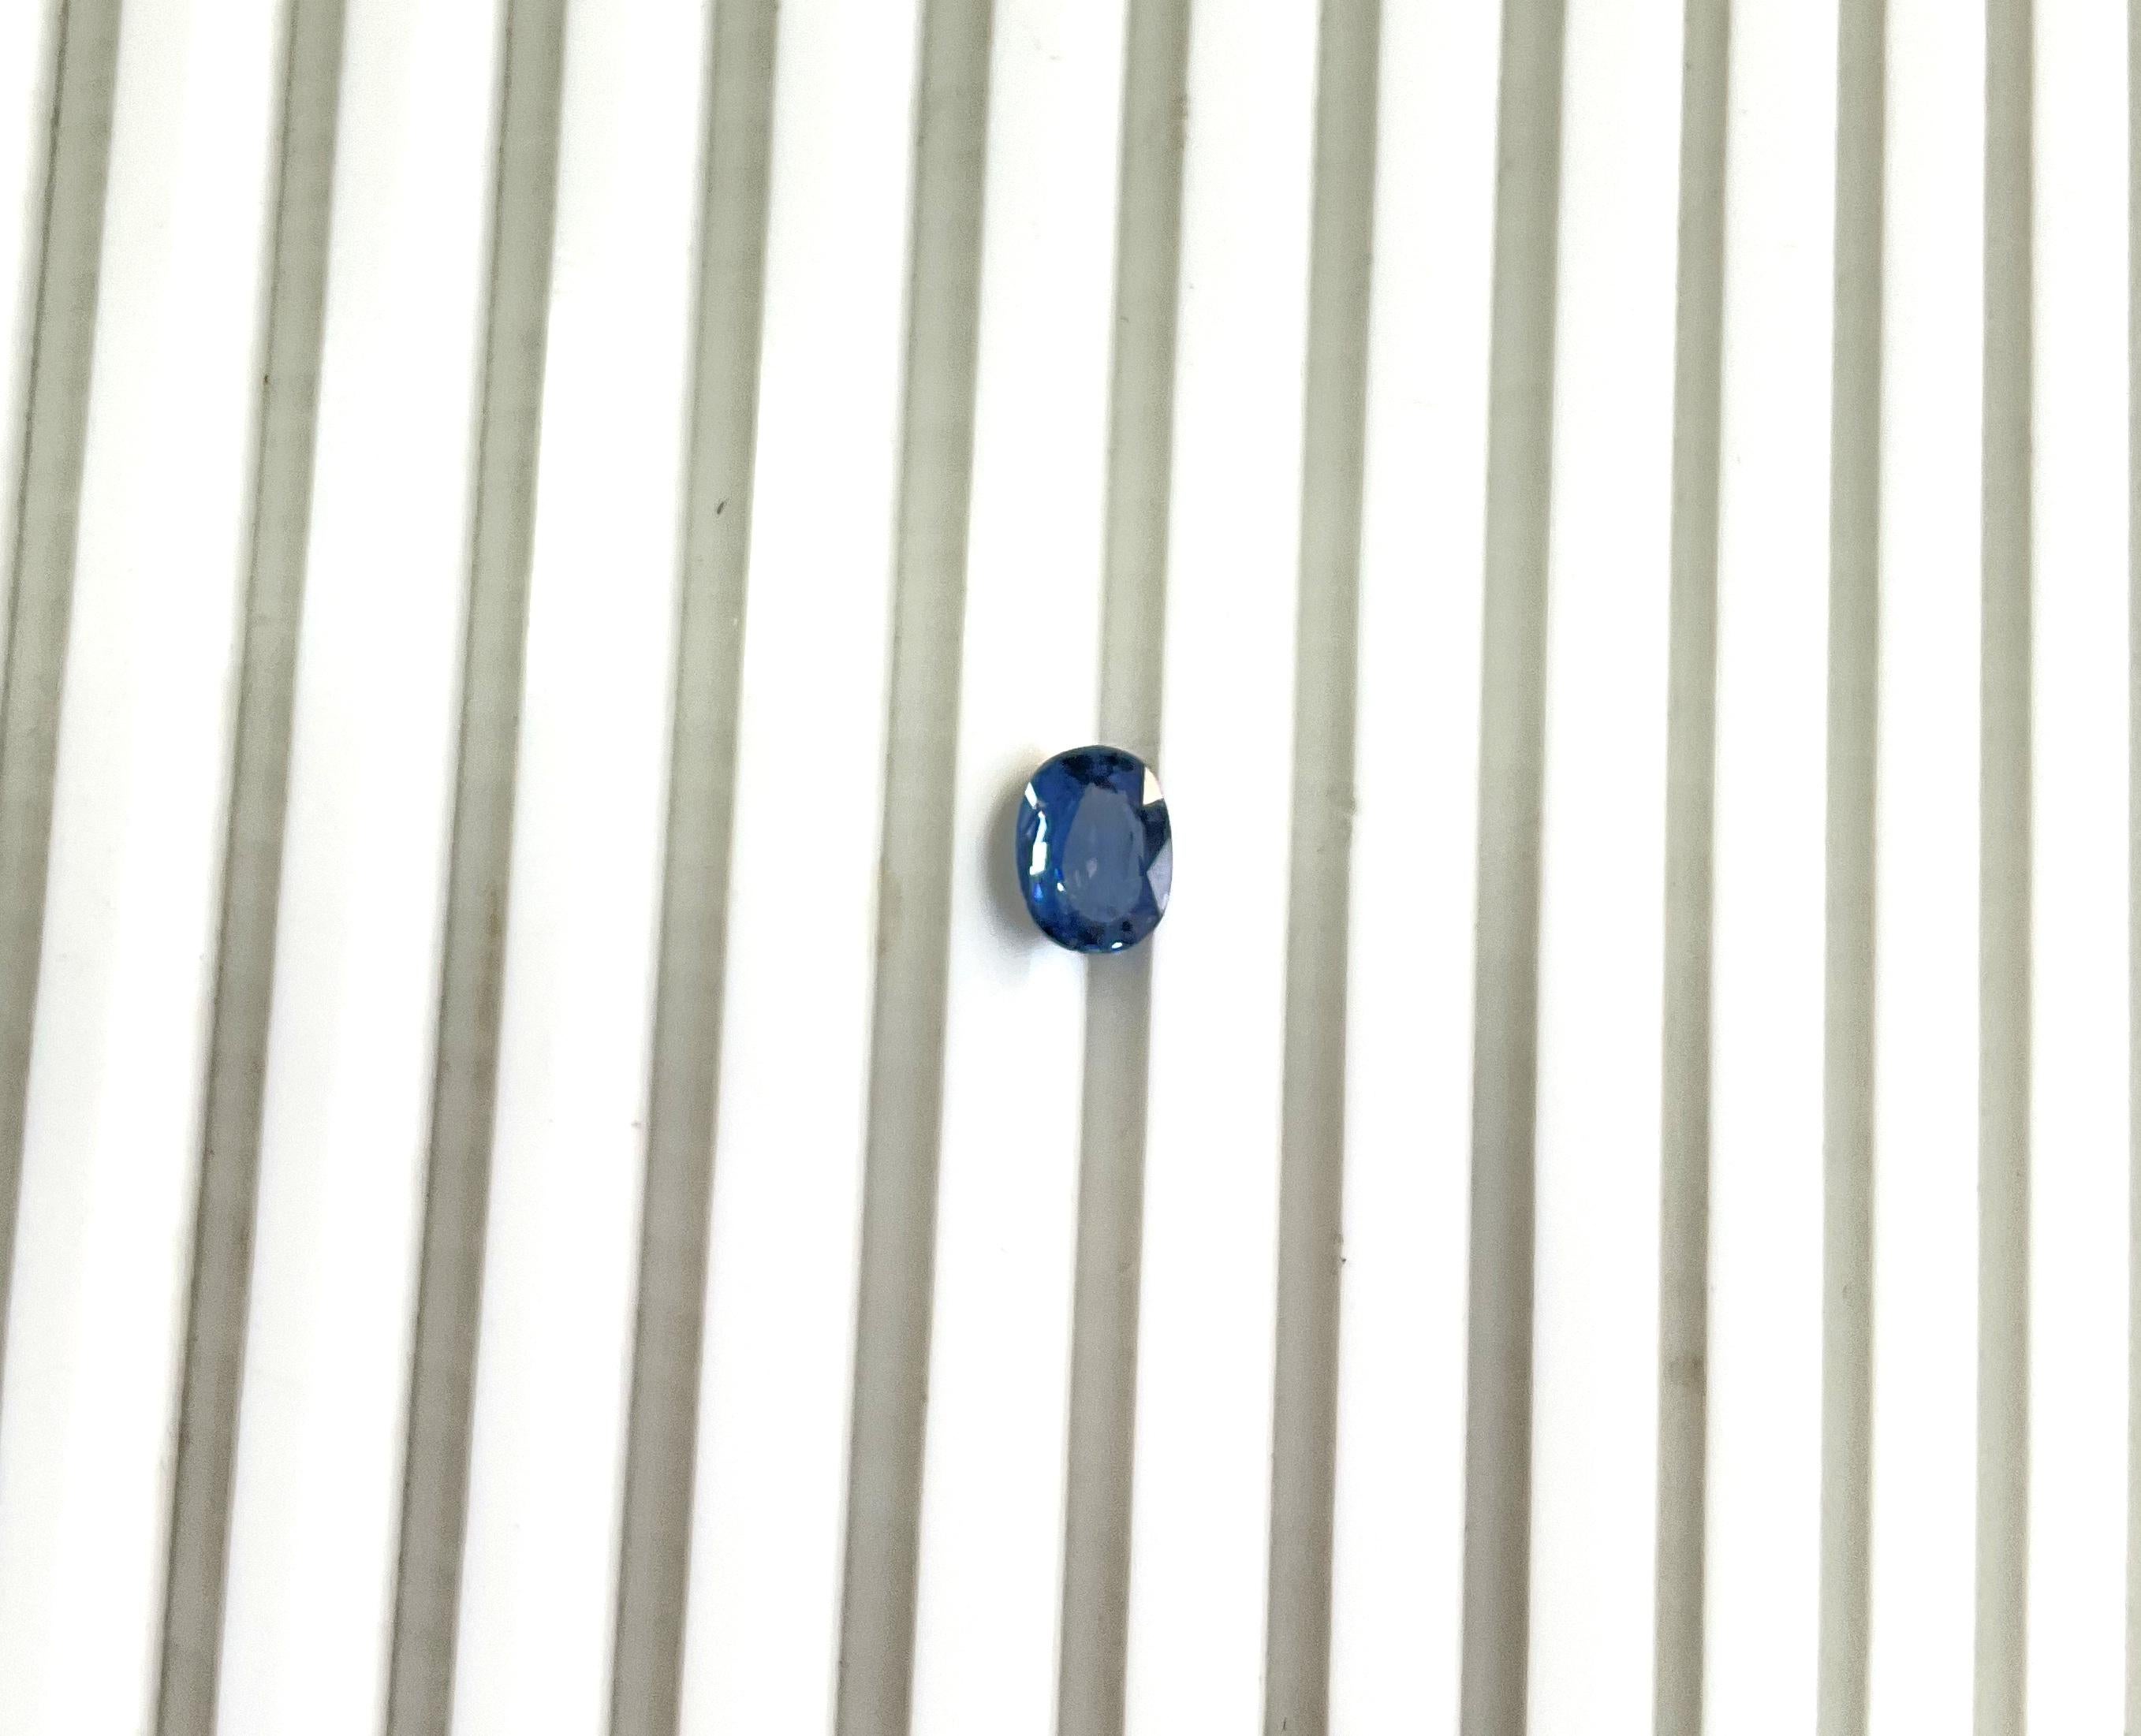 Tanzania Blue Spinel Oval Faceted Natural Cut Stone for Fine Jewelry
Weight - 1.64 Ct
Size - 8x6x4 mm
Shape - Oval
Quantity - 1 Piece